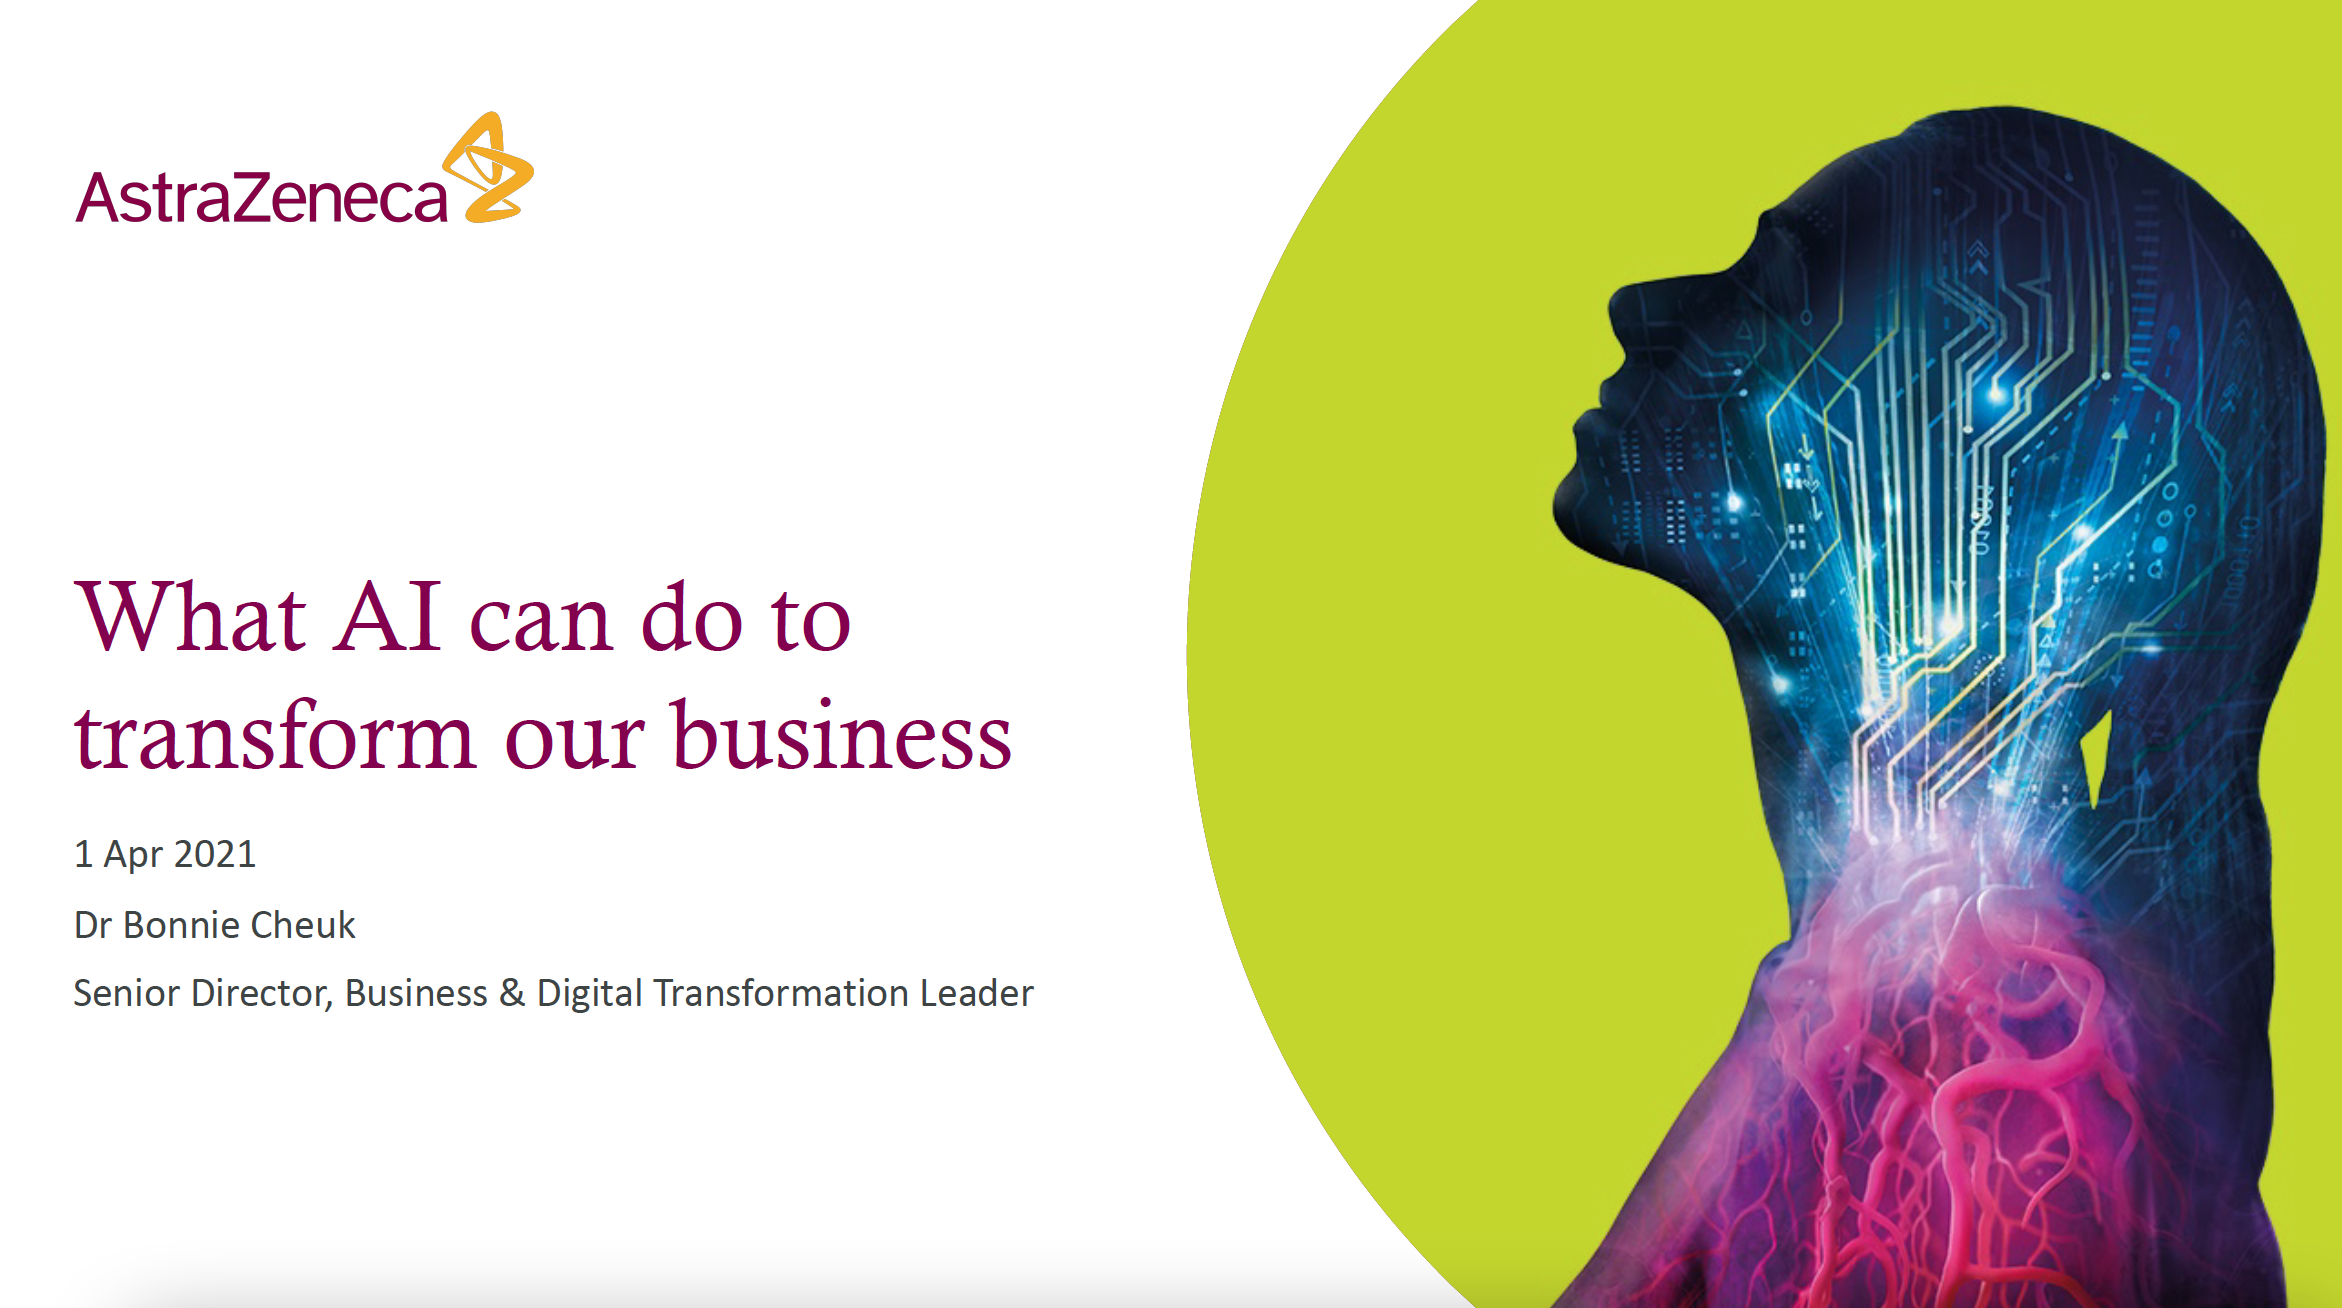 Video: What AI can do to transform our business with AstraZeneca